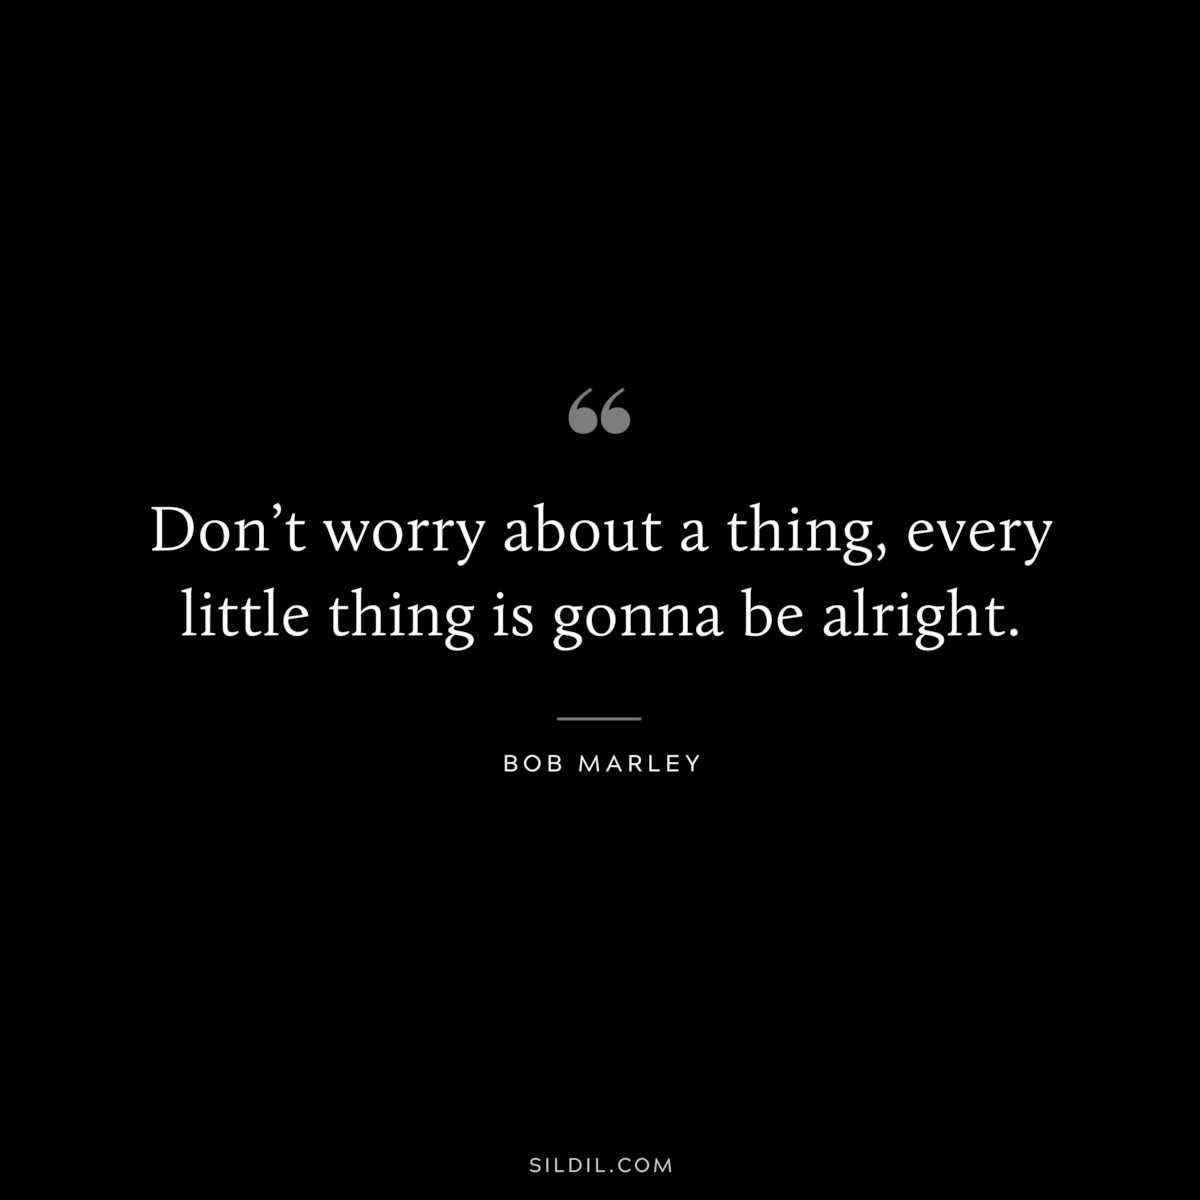 Don’t worry about a thing, every little thing is gonna be alright. ― Bob Marley